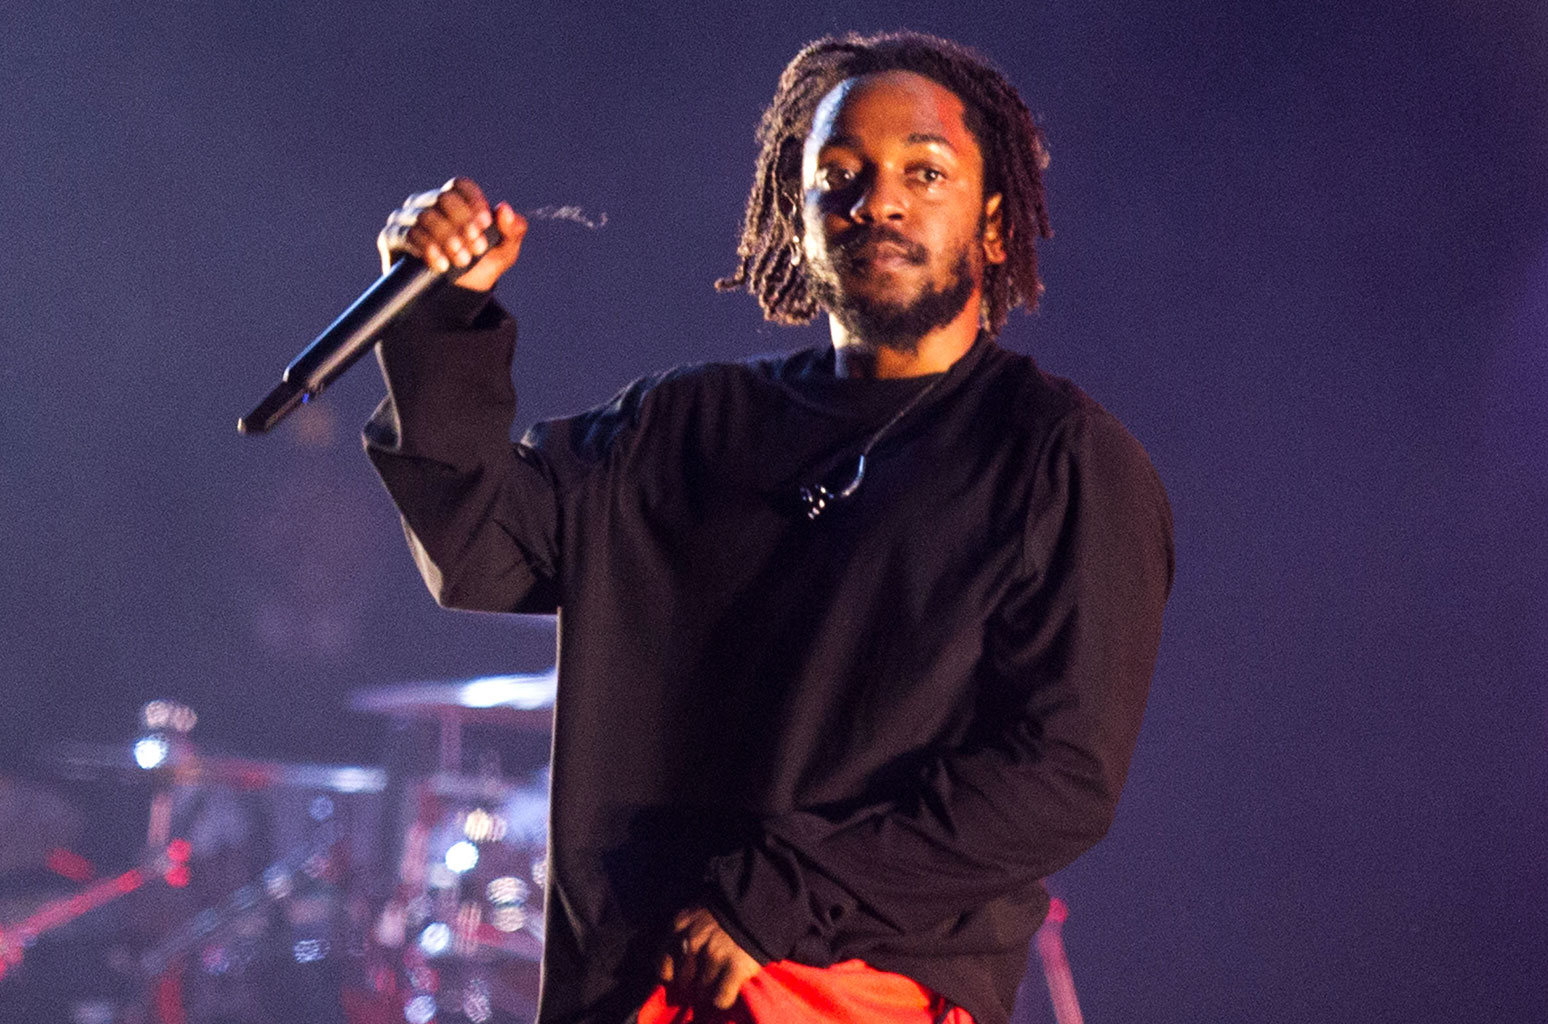 Kendrick Lamar, Roddy Ricch &amp; More Bring Holiday Cheer to South LA For TDE's Annual Charity Concert - www.billboard.com - Los Angeles